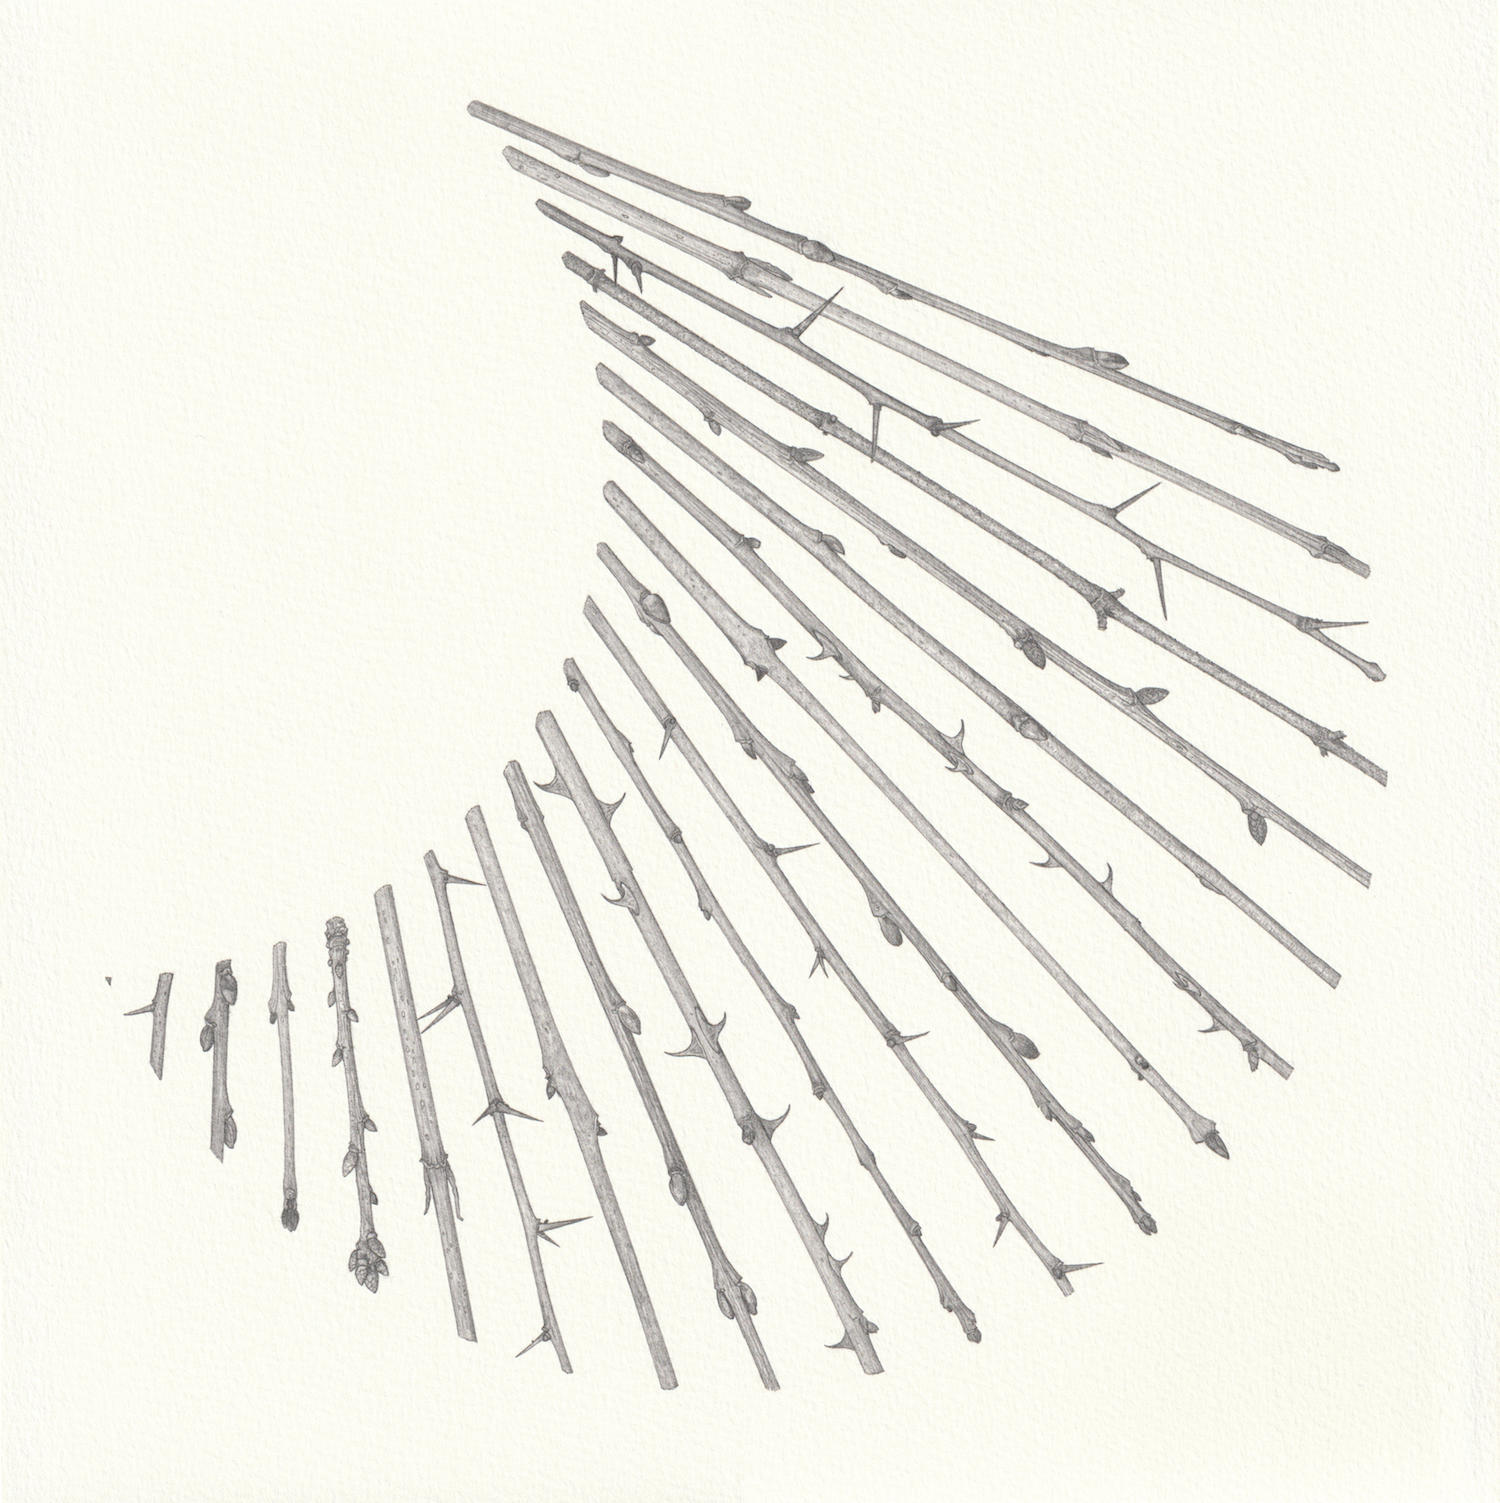 Small Arc (28 x 28 cm) pencil on paper